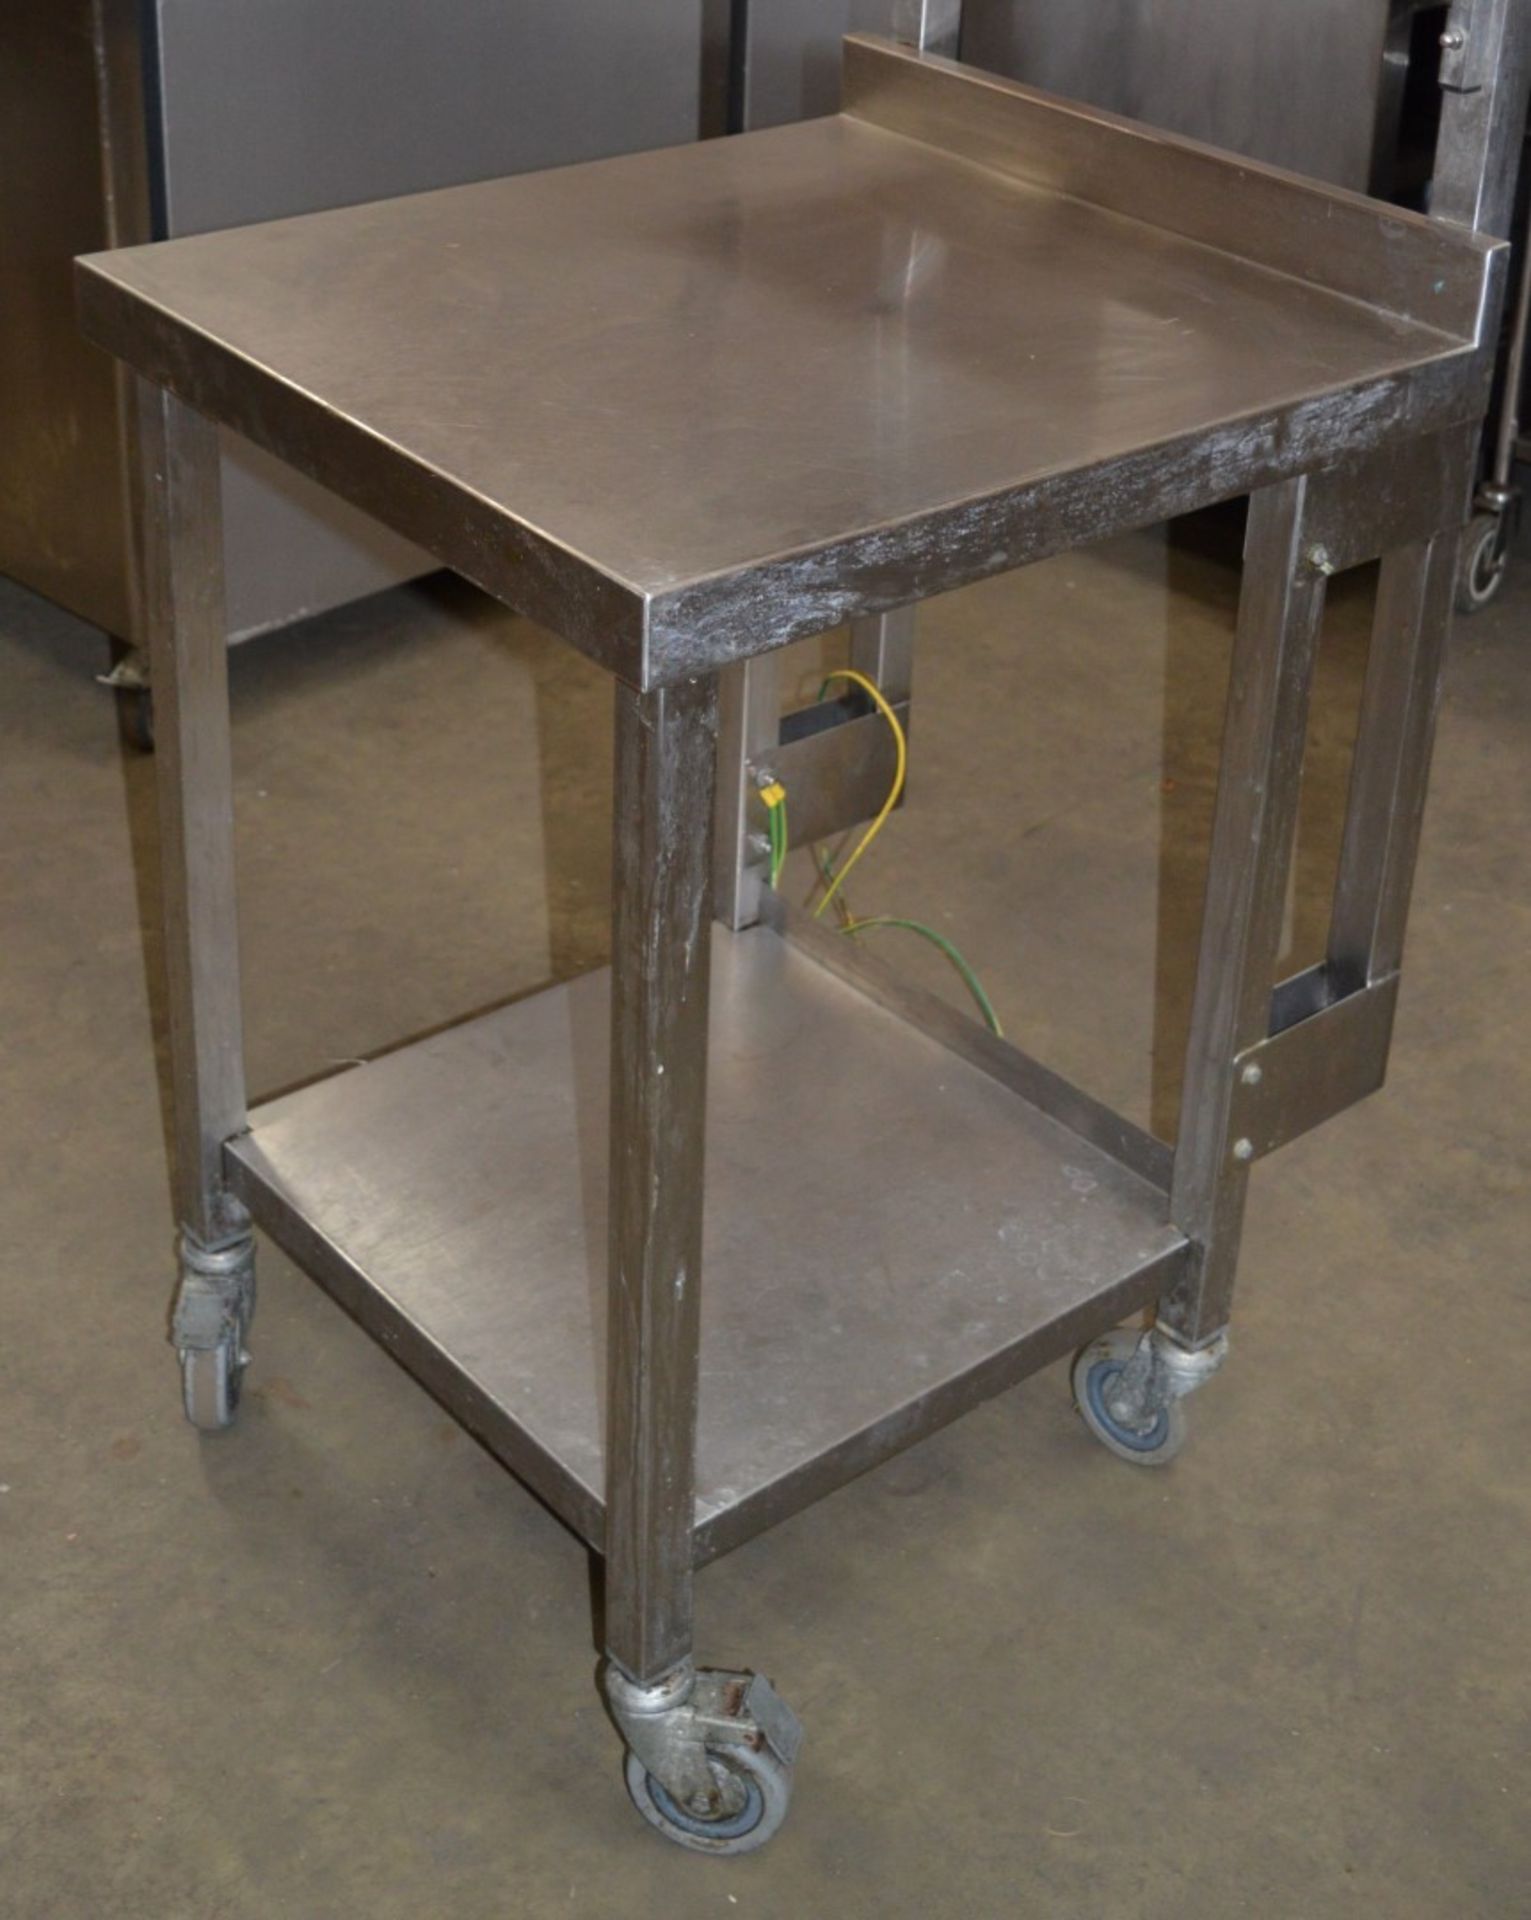 1 x Stainless Steel Commercial Catering Prep Bench on Castors With Under Shelf and Over Shelf - H131 - Image 2 of 4